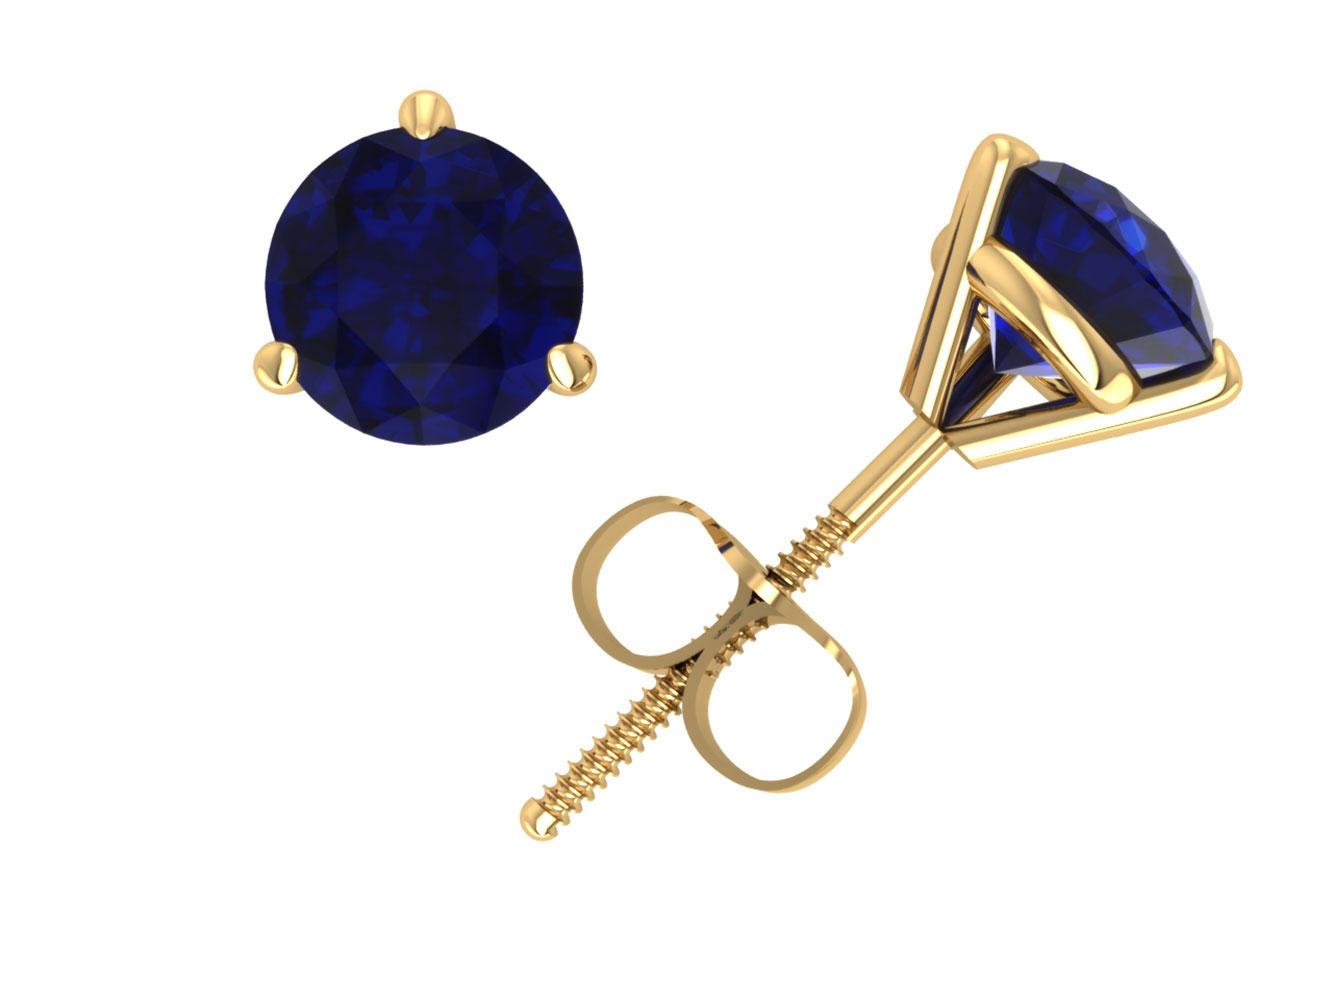 Jewel We Sell 1.50Carat Round Blue Sapphire Martini Solitaire Stud Earrings 14k White or Yellow Gold AA Quality